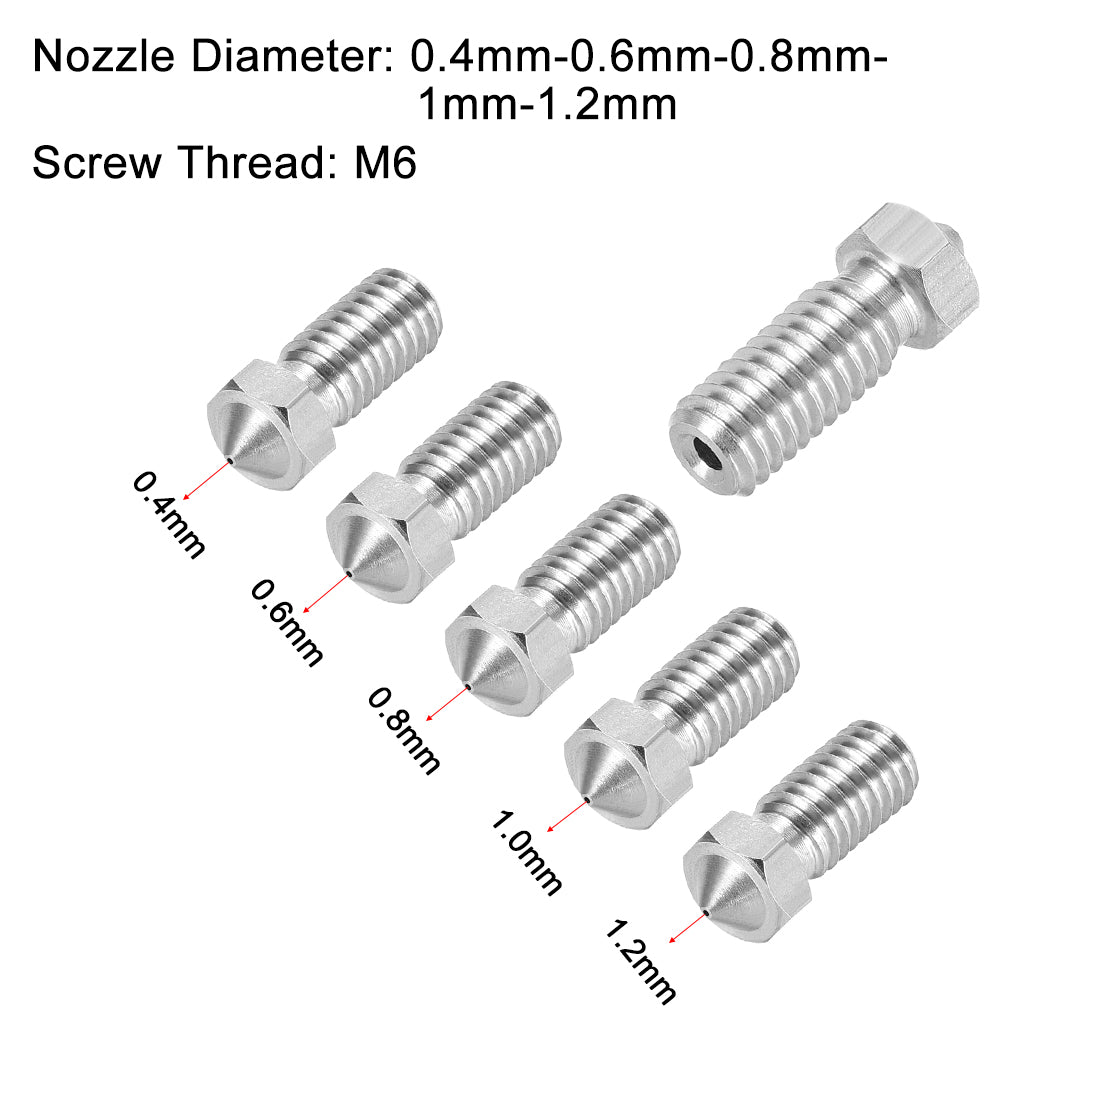 uxcell Uxcell 3D Printer Nozzle Fit for V6,for 1.75mm Filament Stainless Steel,0.4mm - 1.2mm Total 5pcs